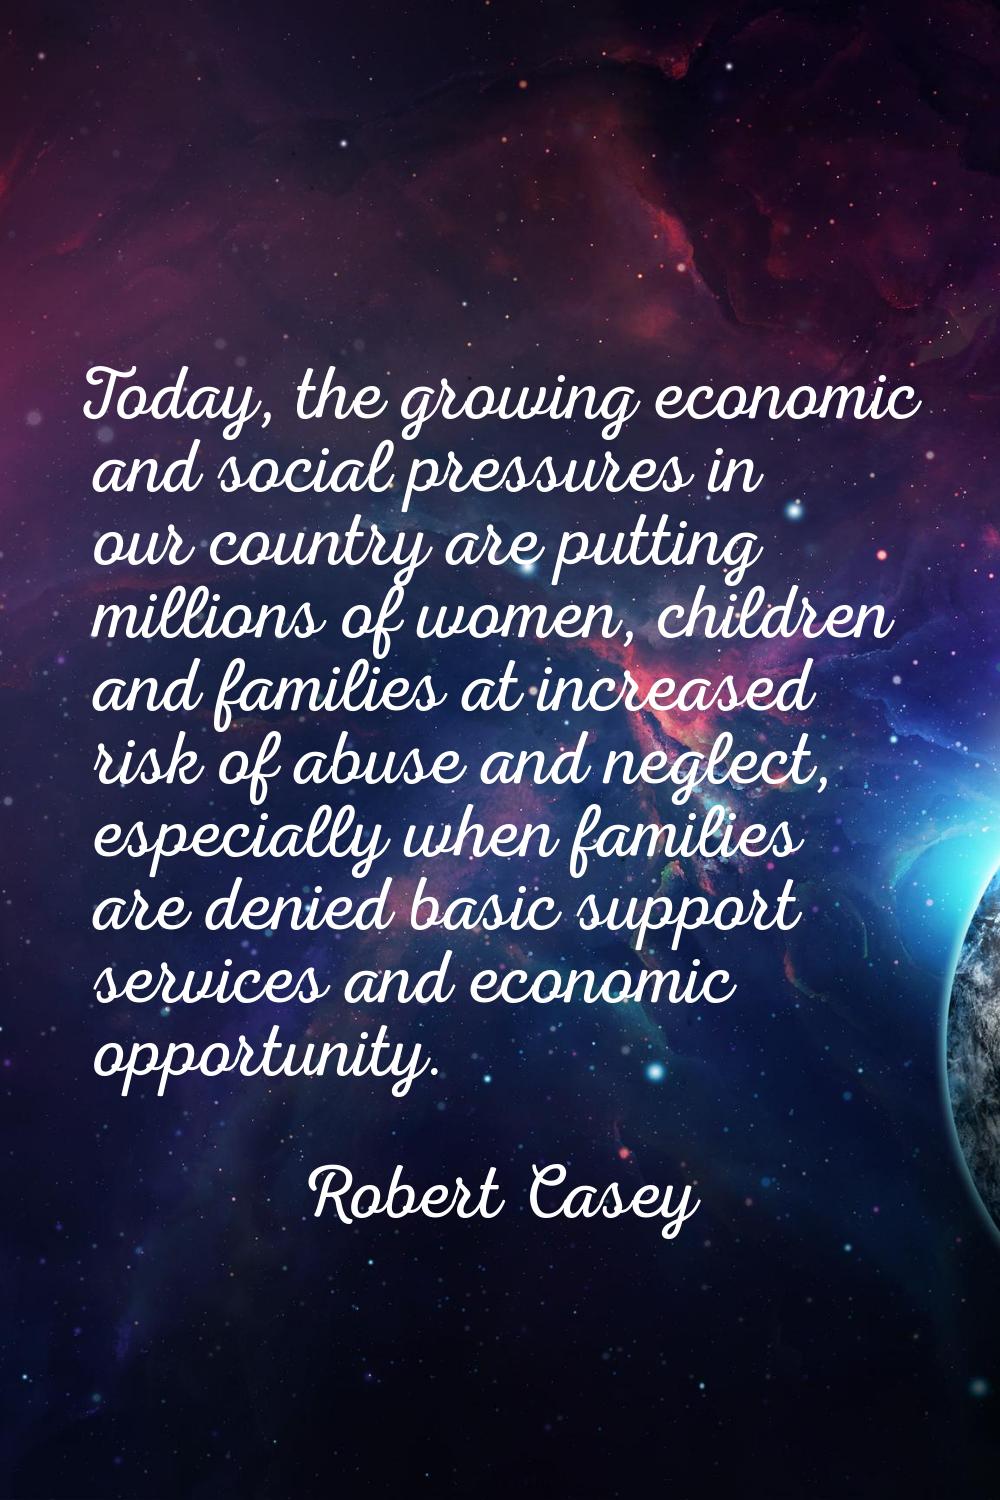 Today, the growing economic and social pressures in our country are putting millions of women, chil